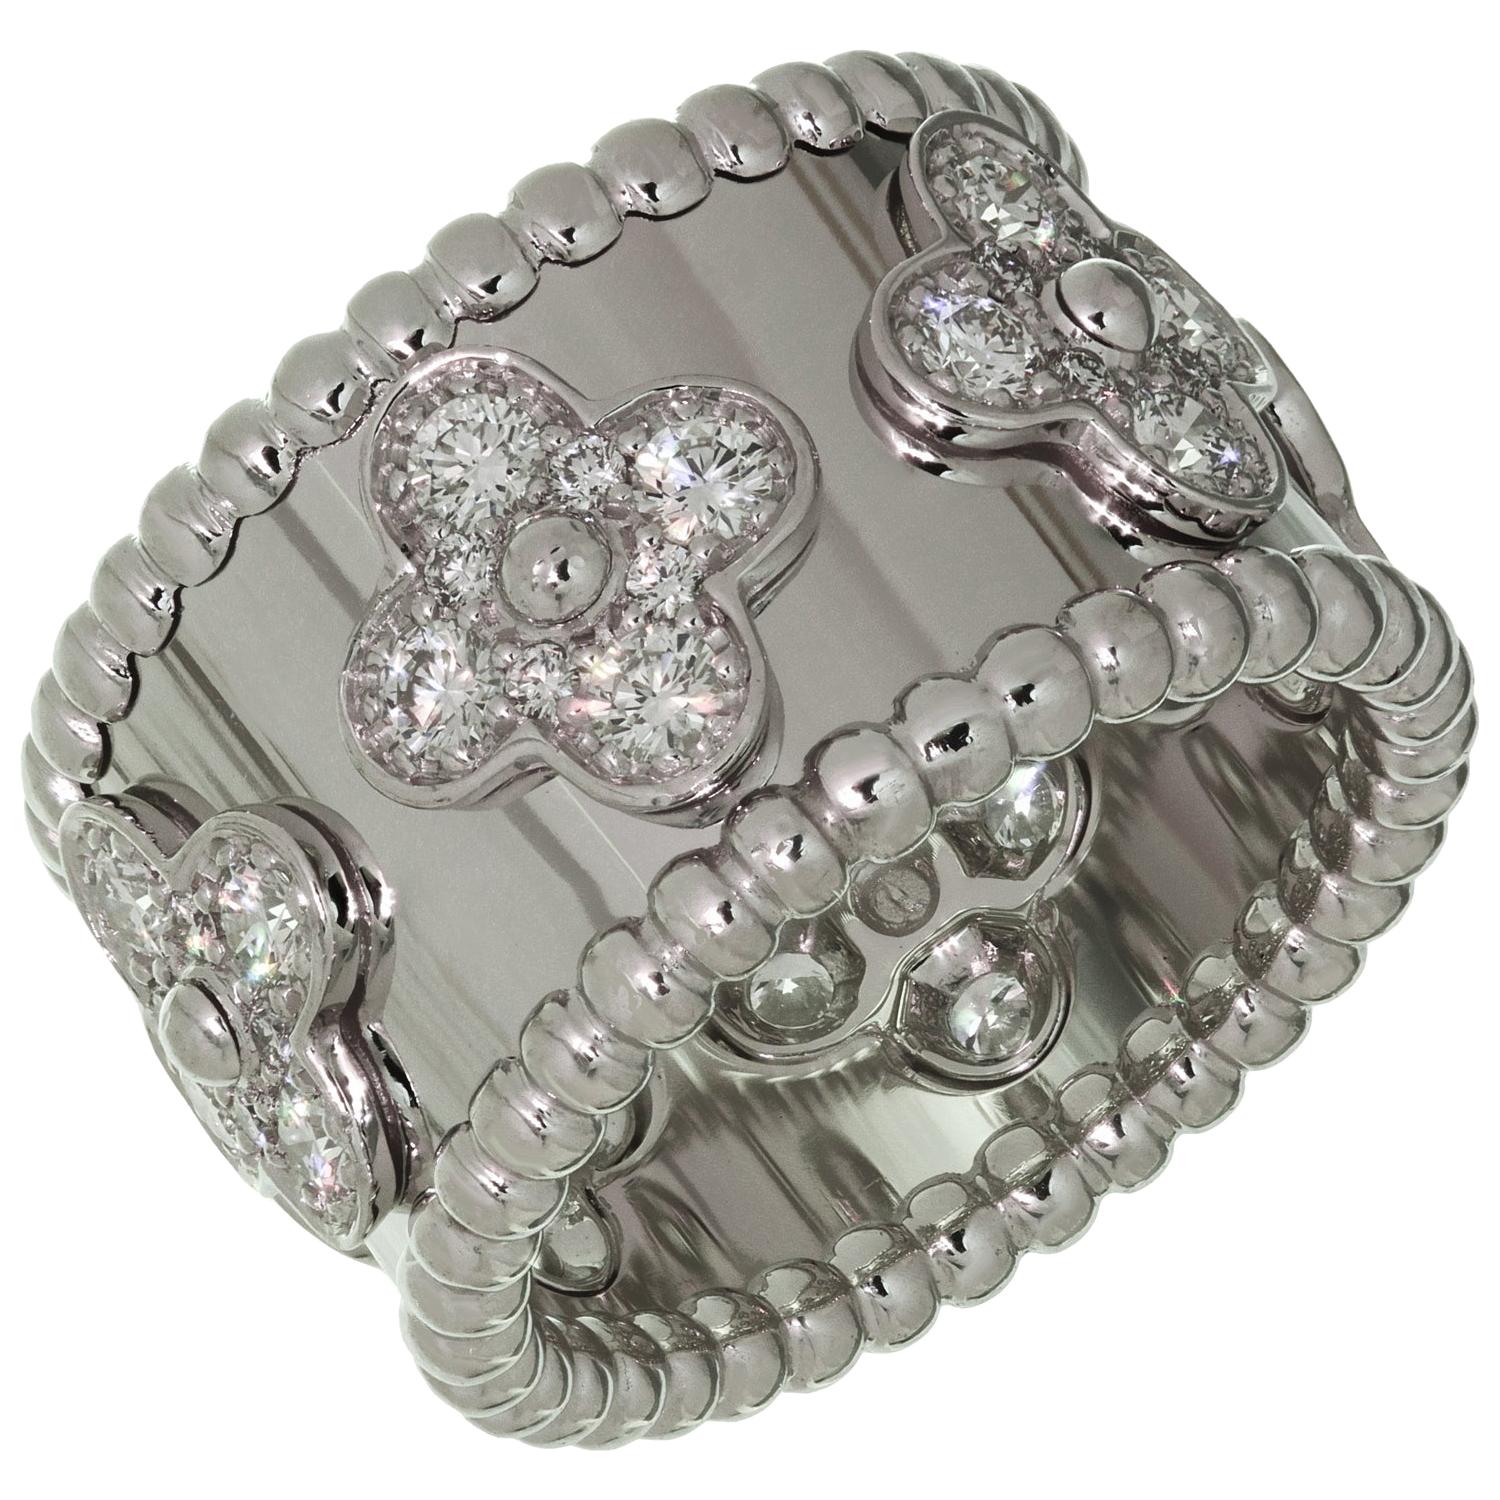 Van Cleef & Arpels Perlée Clovers Large Diamond White Gold Band Ring. Sz. 50 For Sale